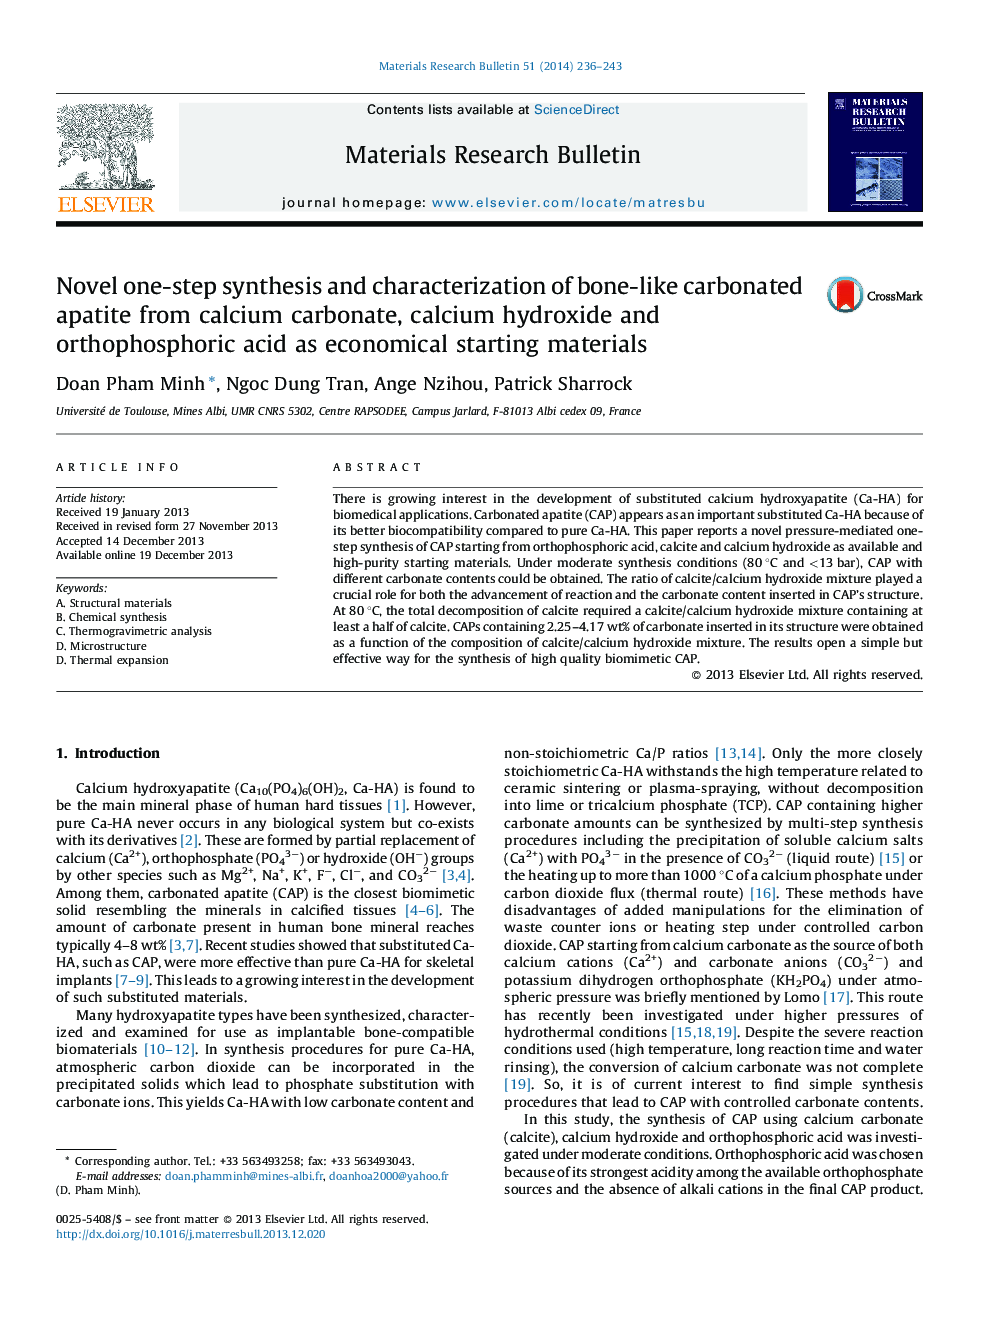 Novel one-step synthesis and characterization of bone-like carbonated apatite from calcium carbonate, calcium hydroxide and orthophosphoric acid as economical starting materials